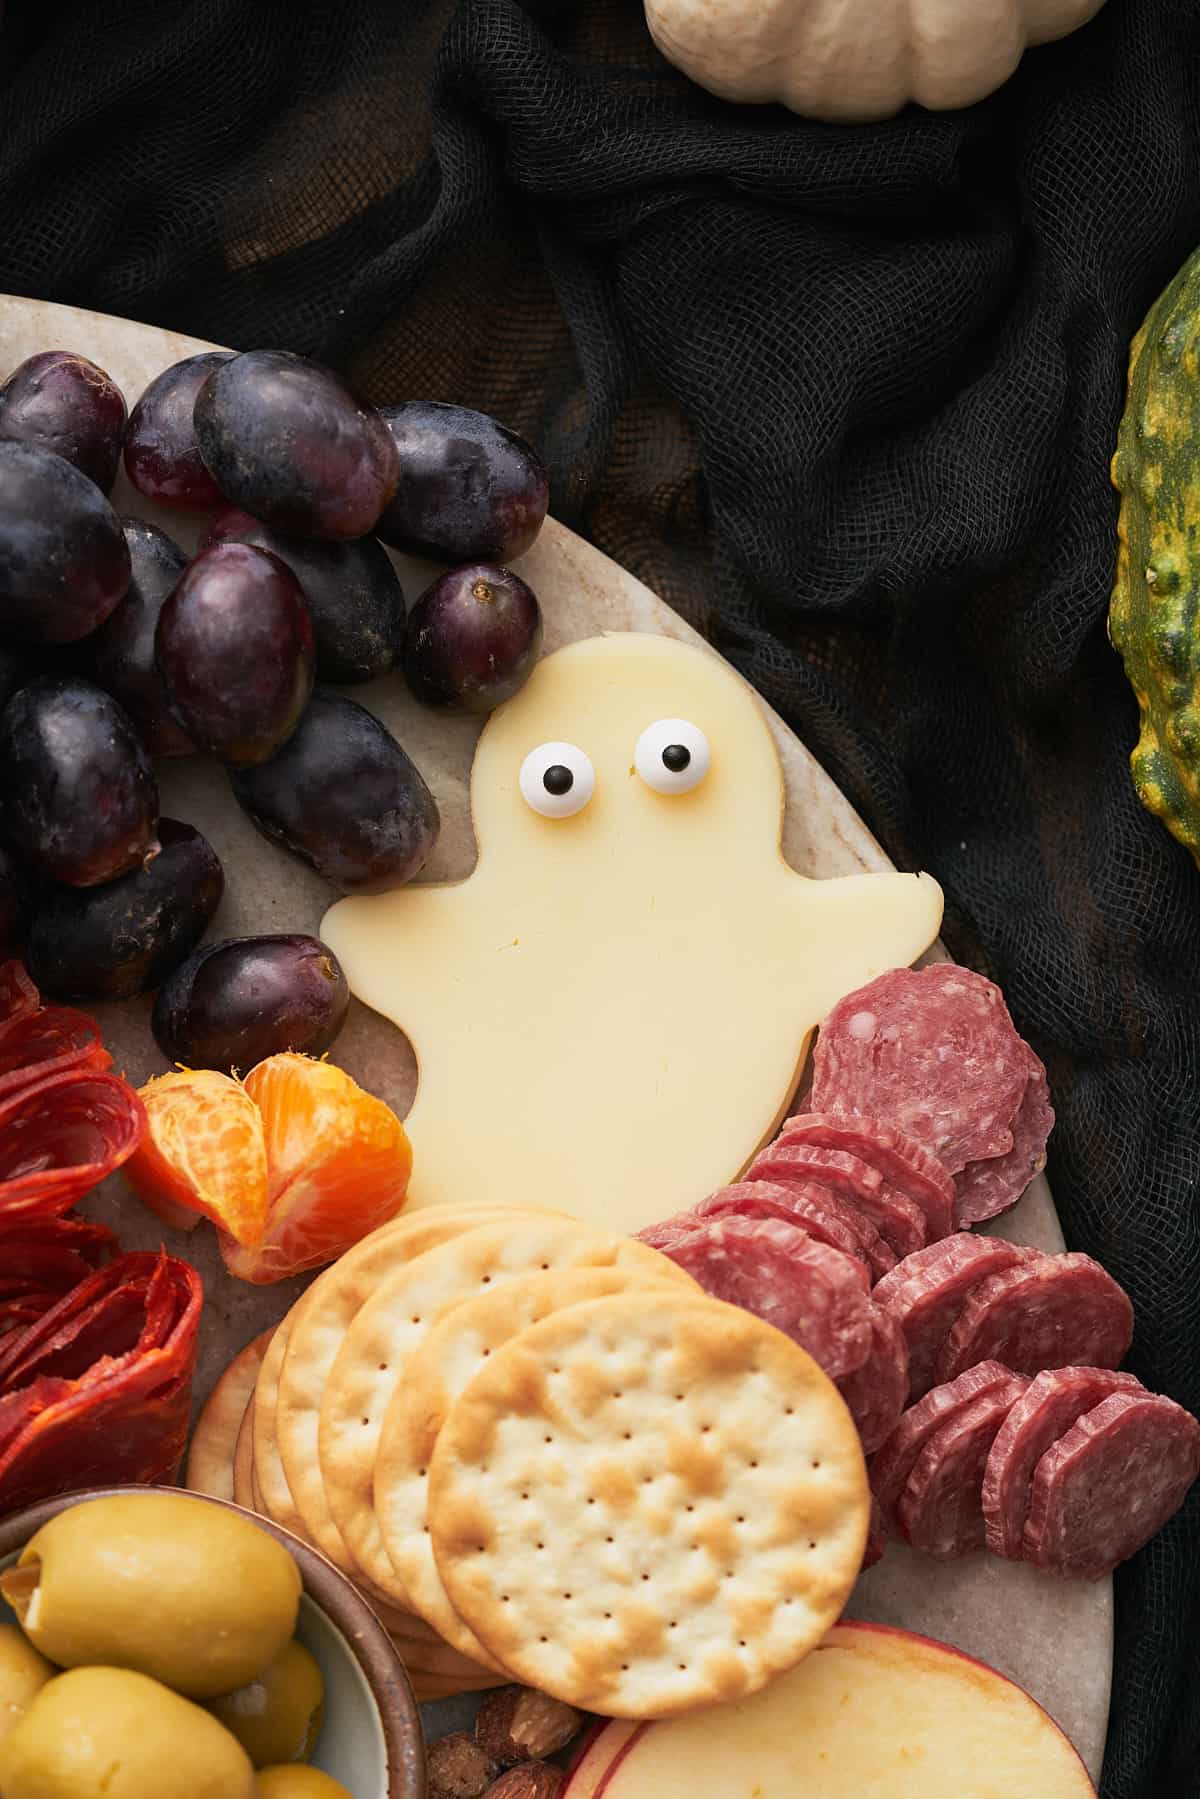 spooky provolone cheese ghost with candy eyeballs, near black grapes, cured salami bites and crackers.